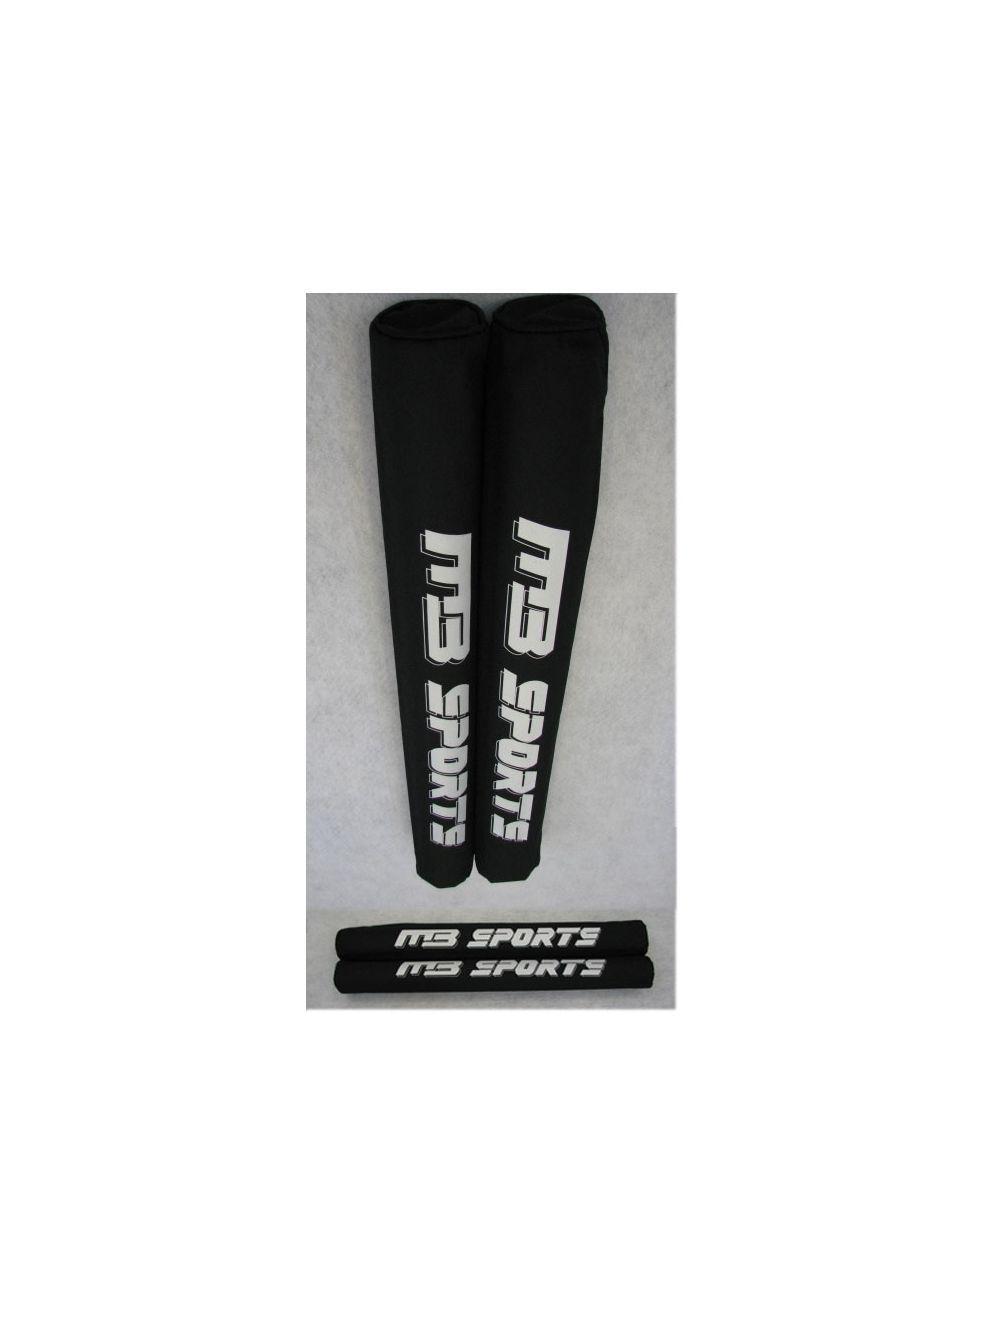 MB Sports Logo - Trailer guide on pole pads with MB Sports Logo Heavy Duty 36